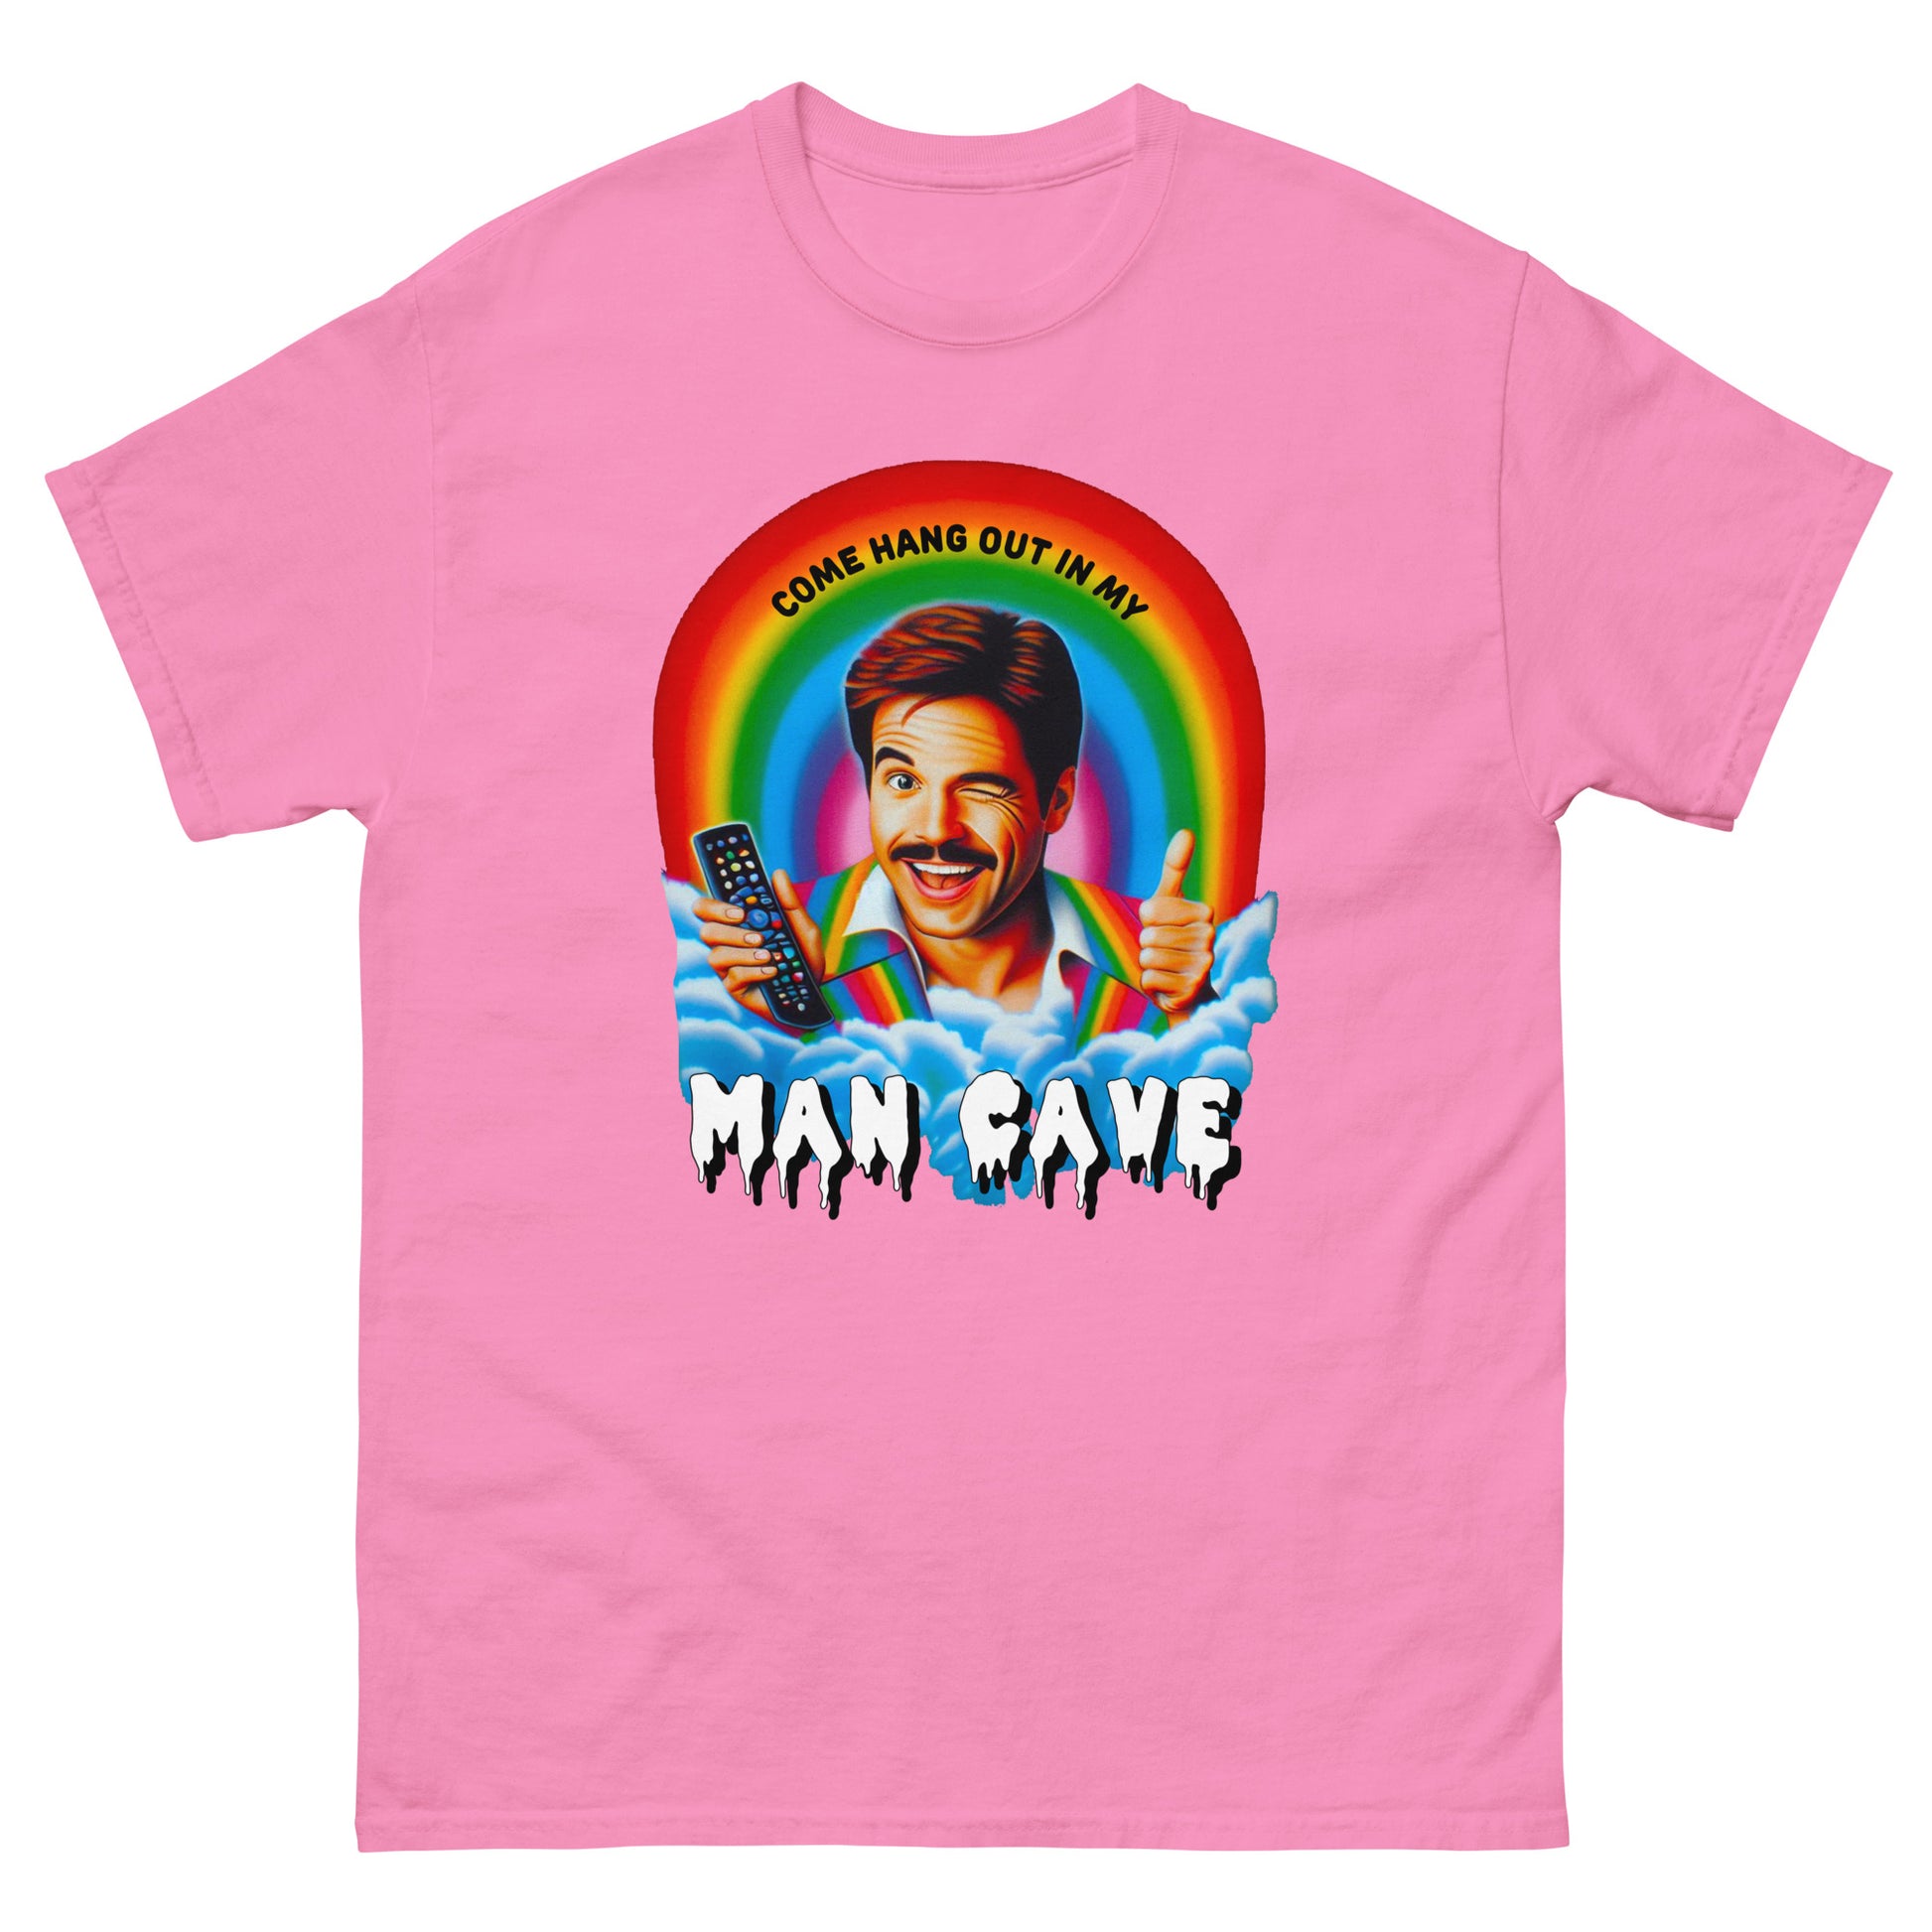 Come hang out in my man cave design printed on t-shirt by Whistler Shirts